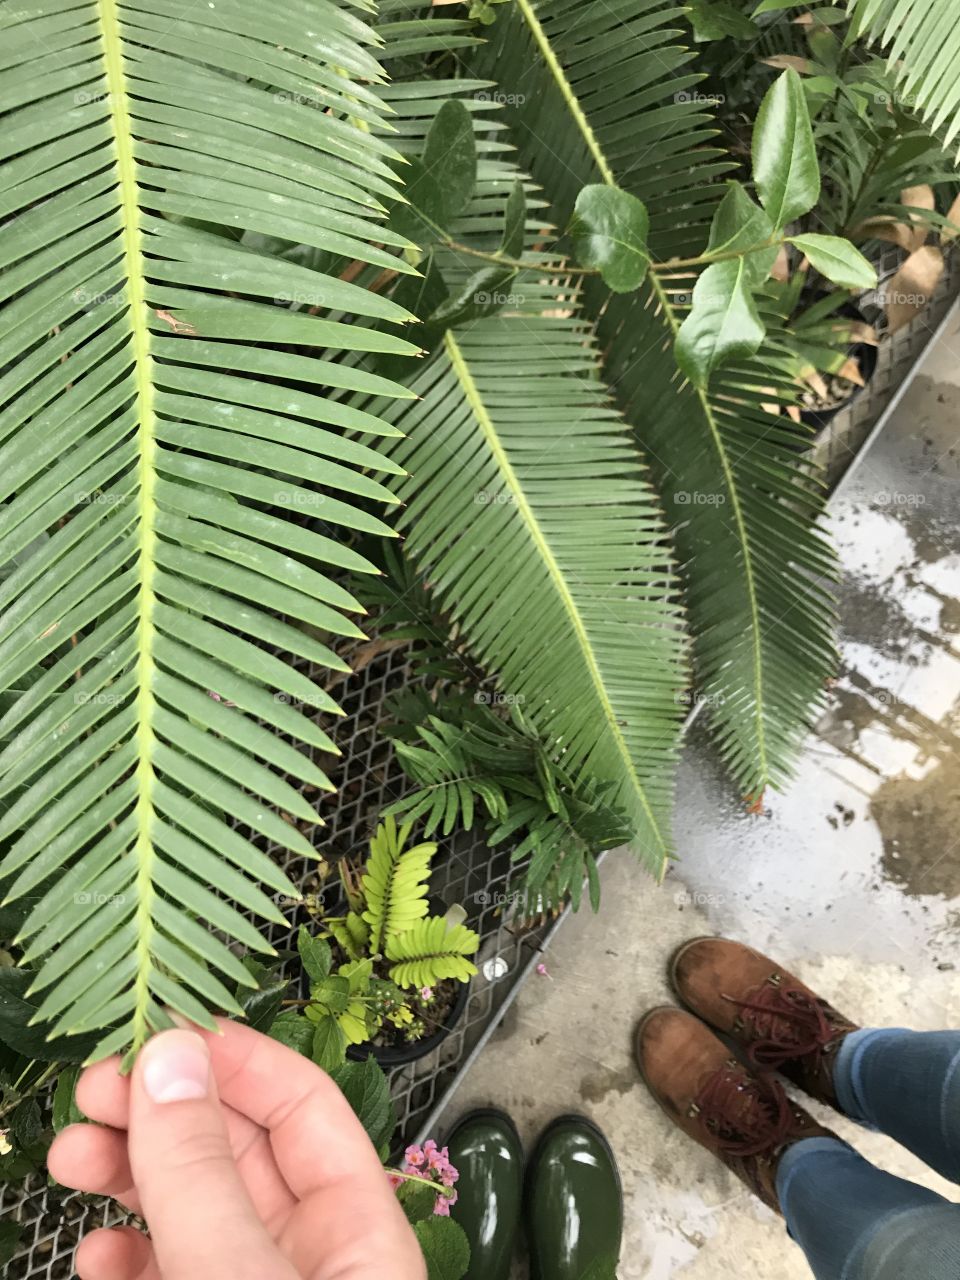 Giant broad leaves in the greenhouse, featuring the feet of a friend